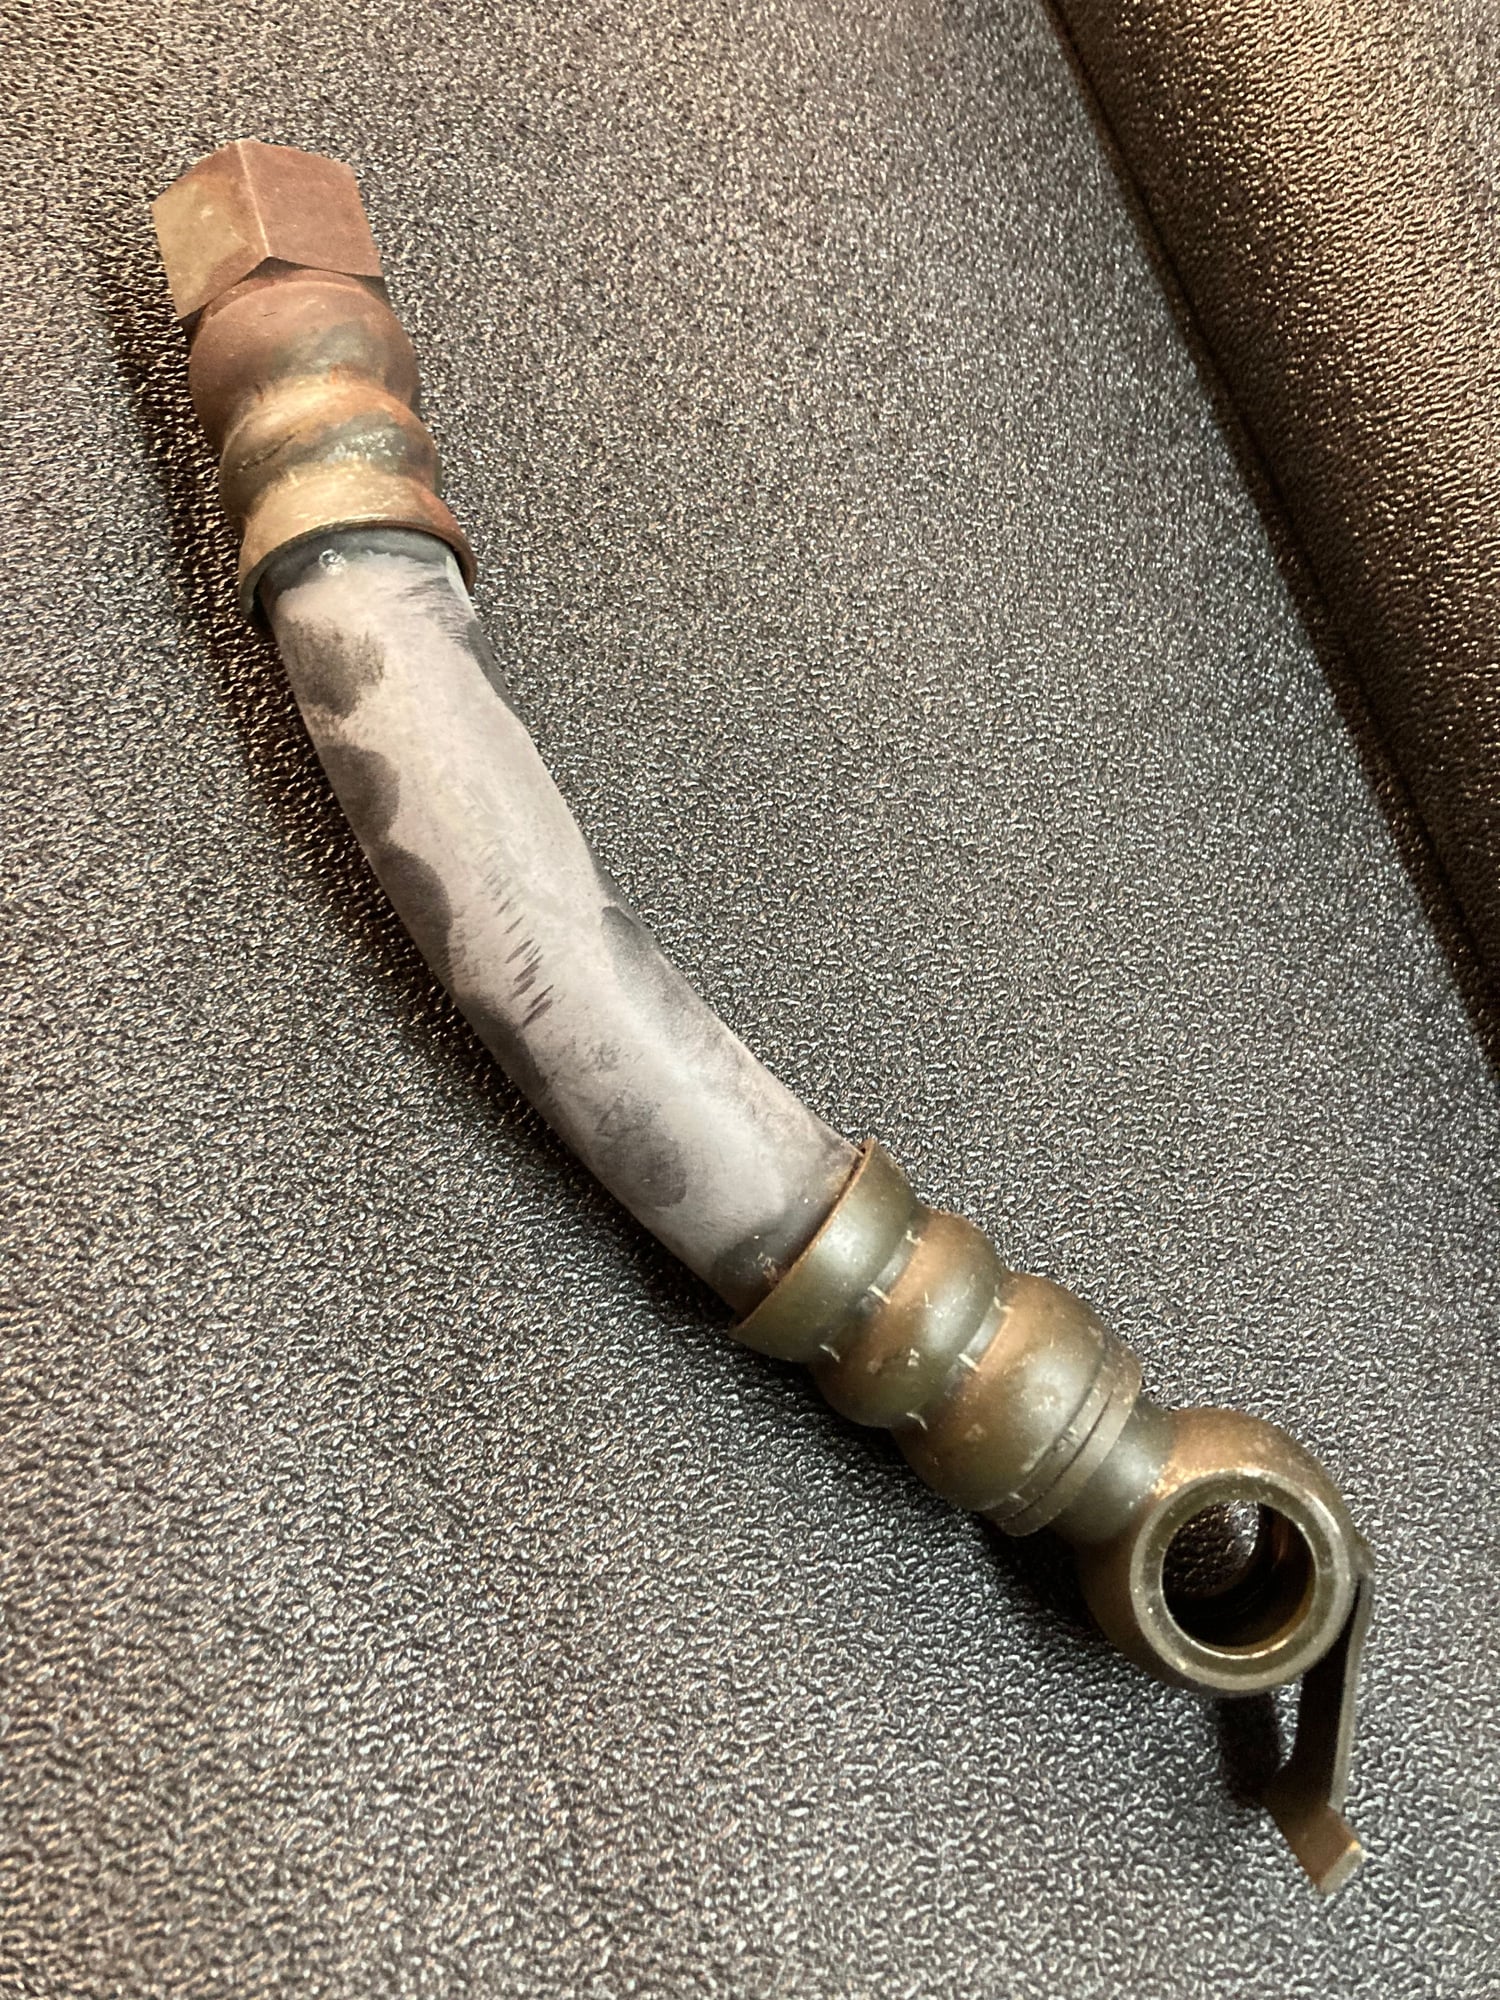 Miscellaneous - Front oil cooler hose, 51K miles - Used - 1993 to 2002 Mazda RX-7 - Birmingham, AL 35226, United States